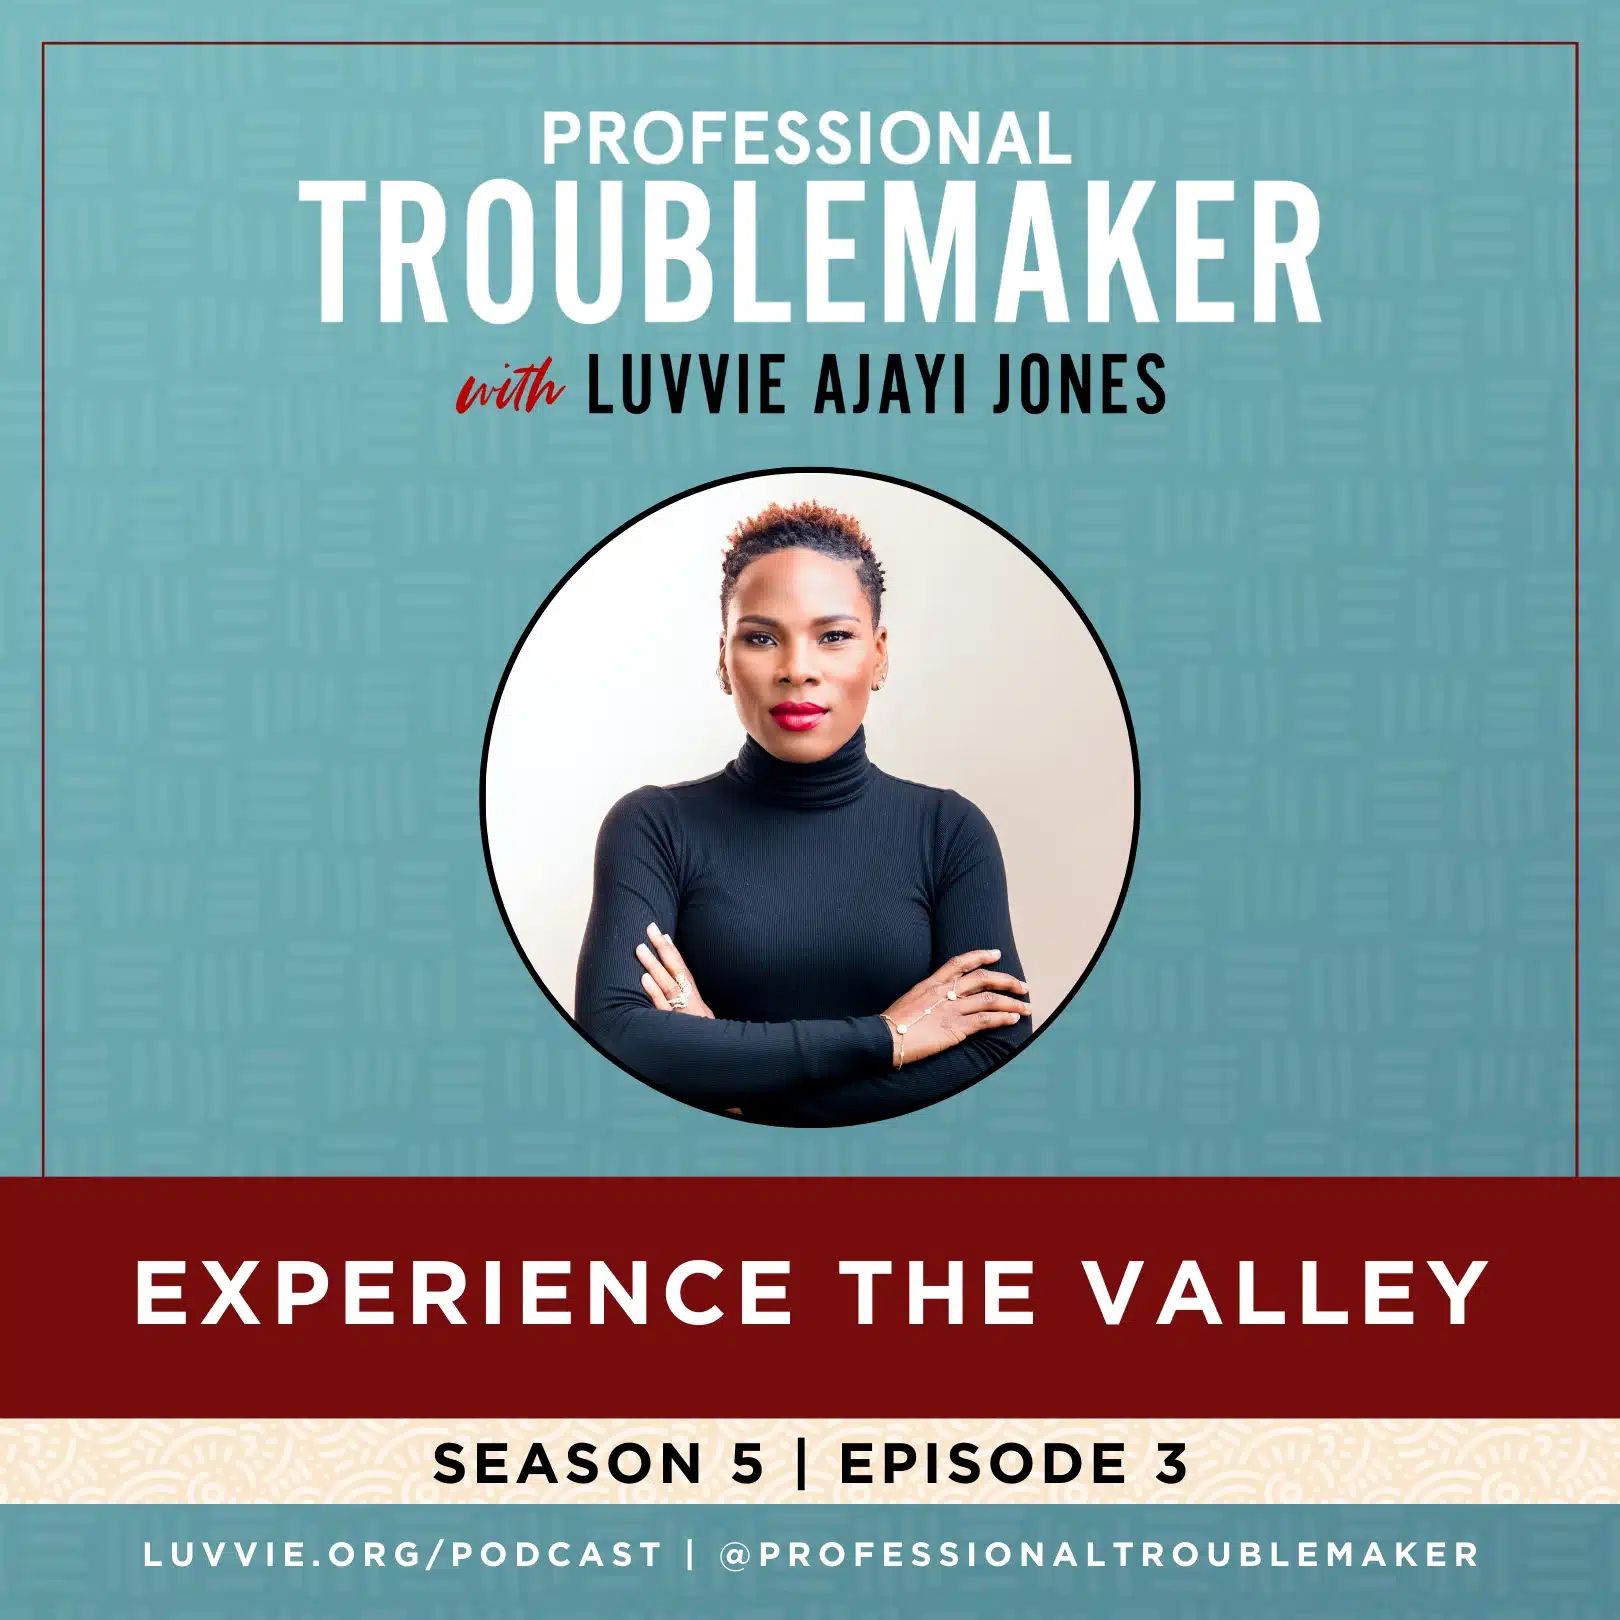 Season 5 Episode 3 - Experience the Valley - Podcast Episode Cover